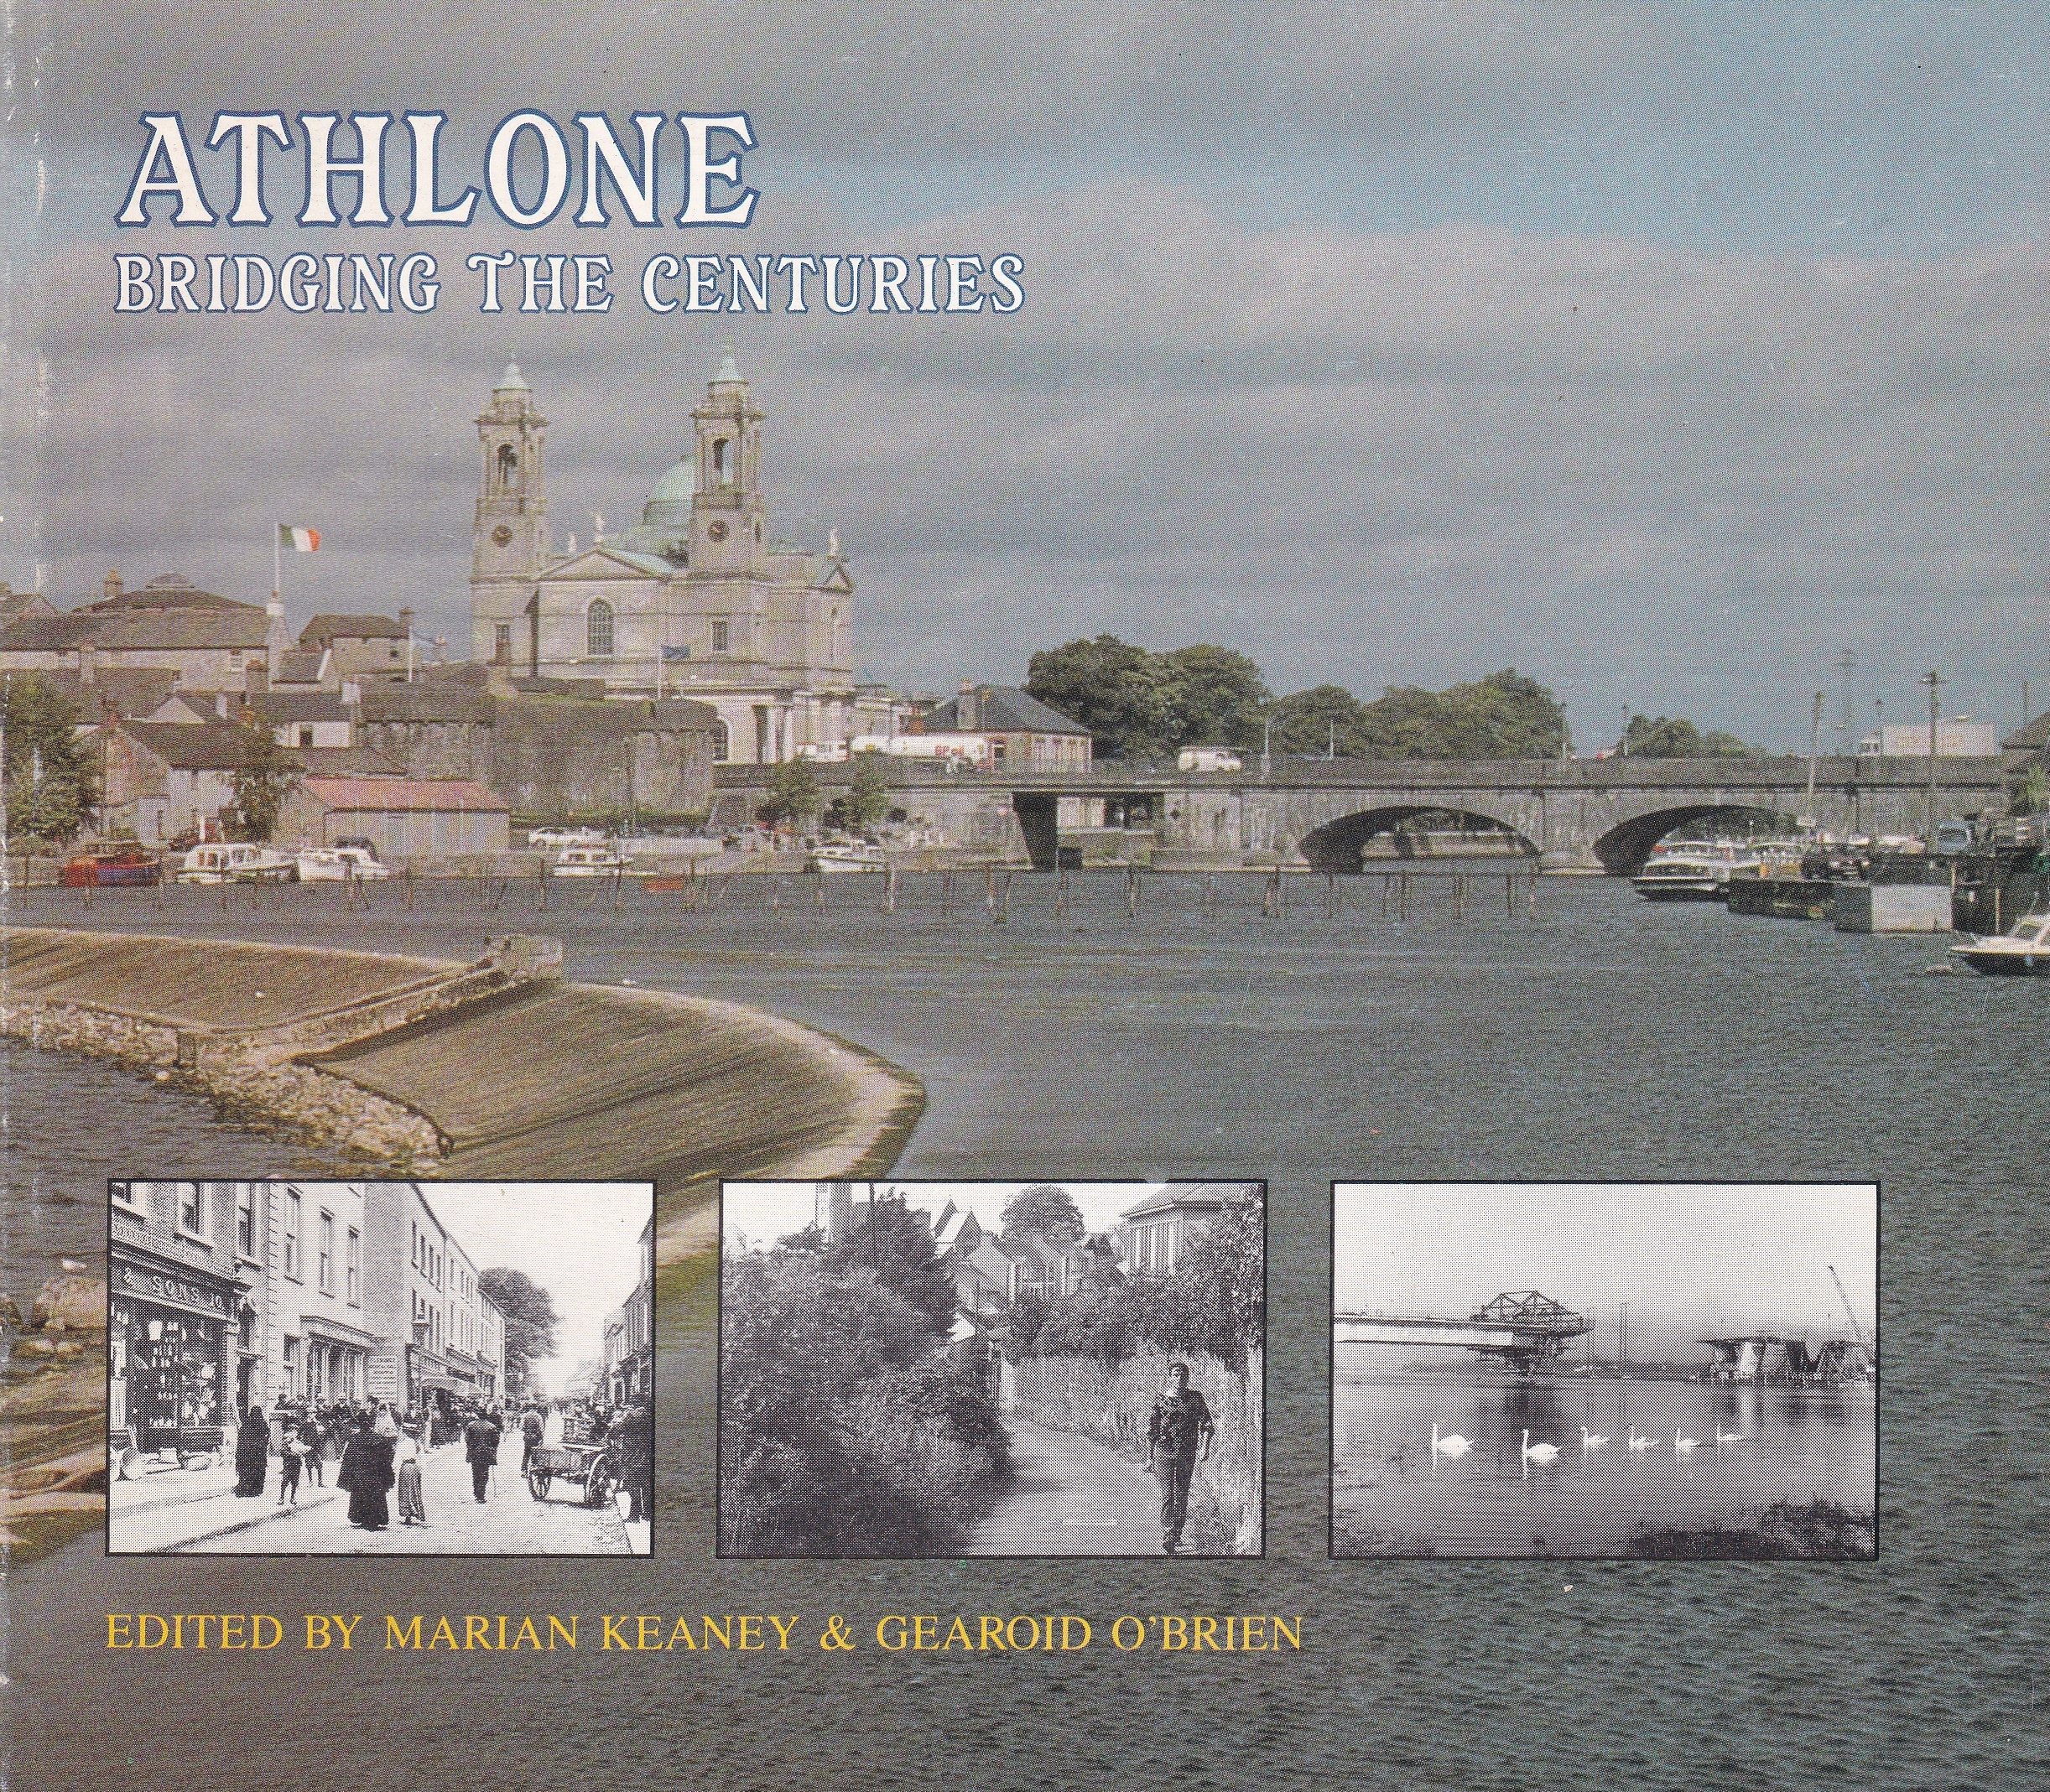 Athlone: Bridging the Centuries by Marian Keaney and Gearoid O'Brien (eds.)